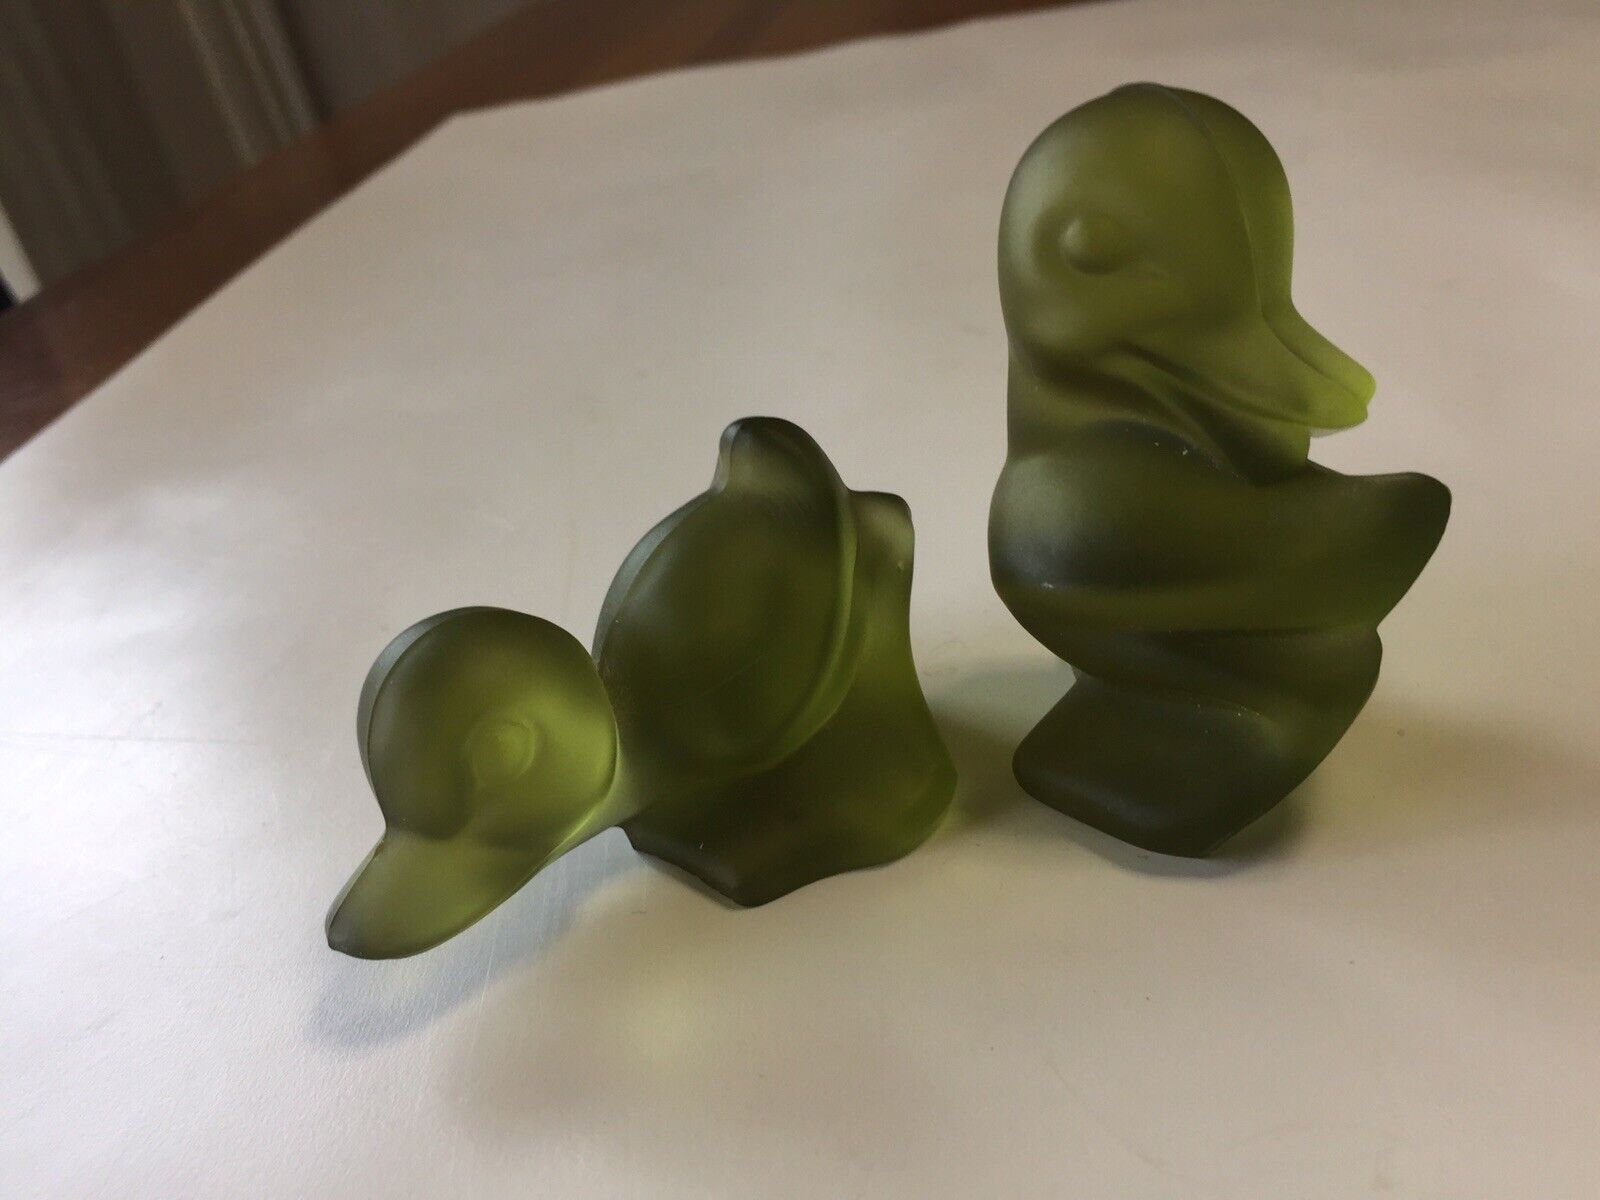 Fostoria Green Frosted Glass Ducklings Set of 2 of 4 Set Small Figurines